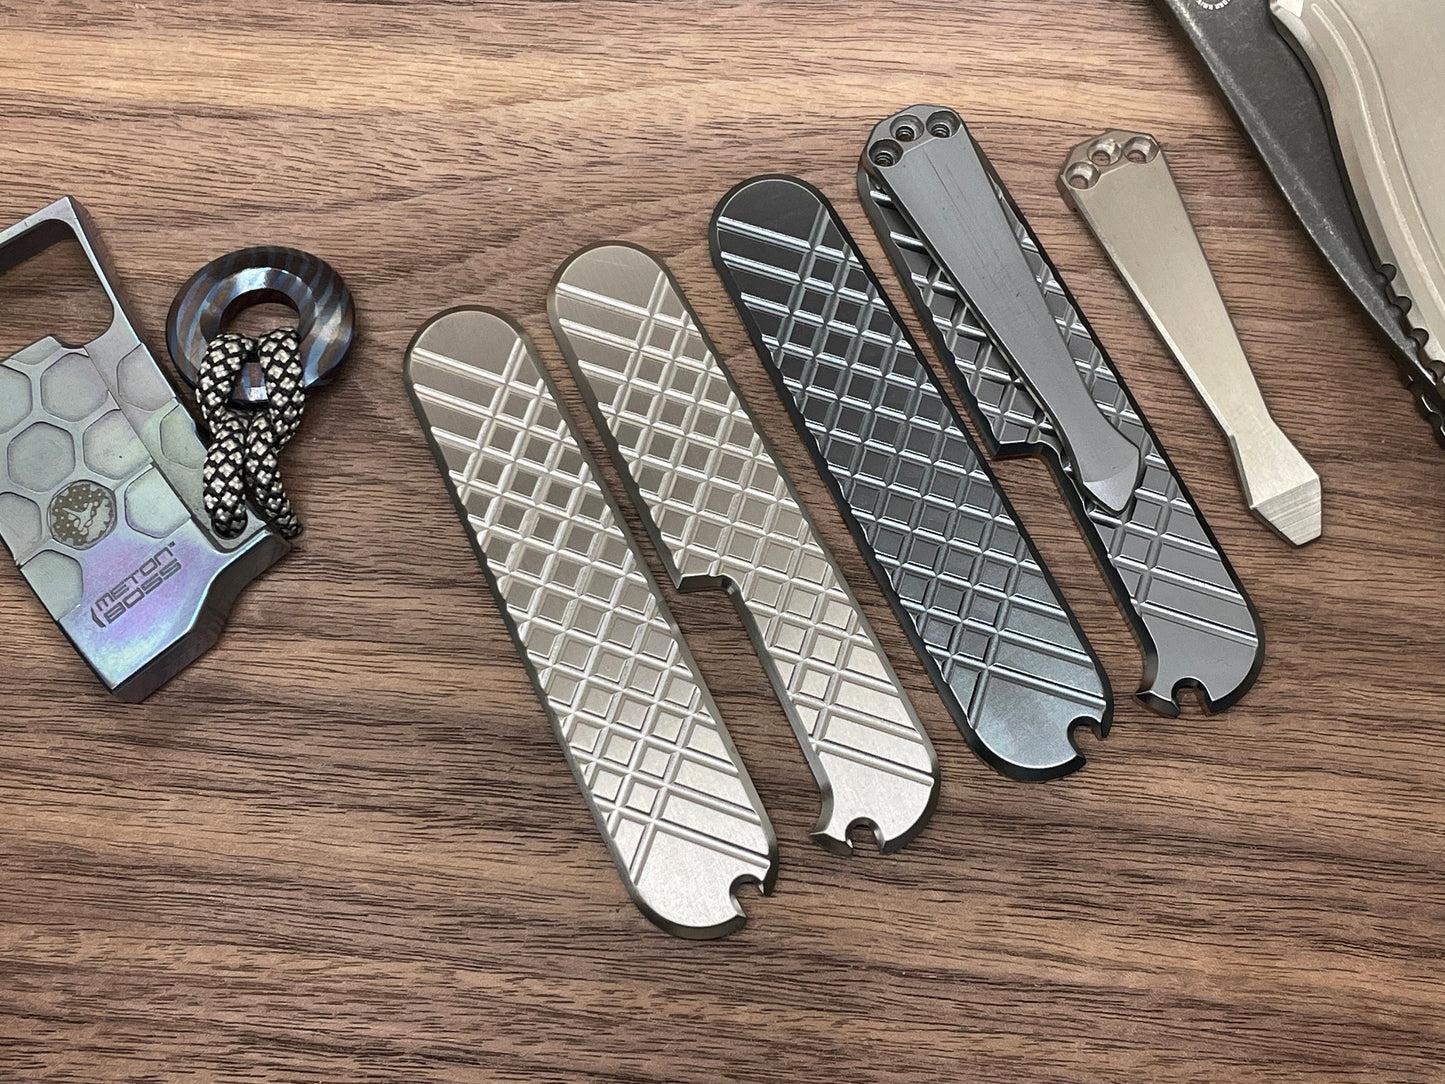 Brushed FRAG 91mm Titanium Scales for Swiss Army SAK